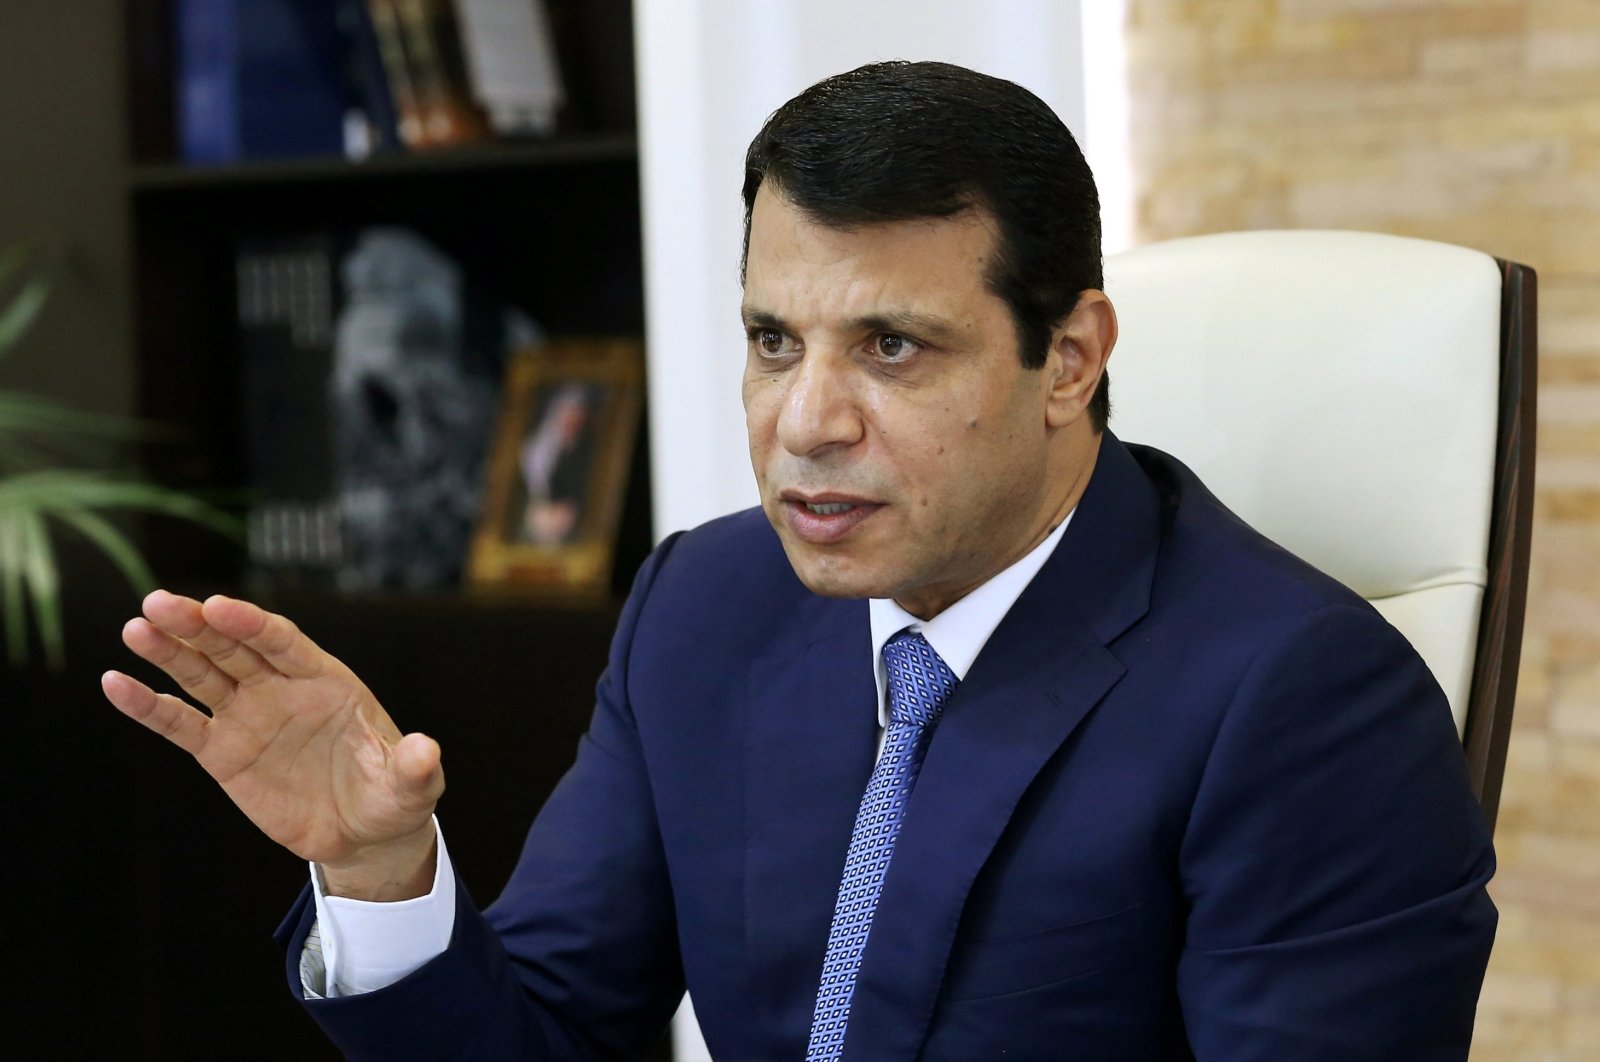 Mohammed Dahlan gestures in his office in Abu Dhabi, United Arab Emirates, Oct. 18, 2016. (Reuters Photo)